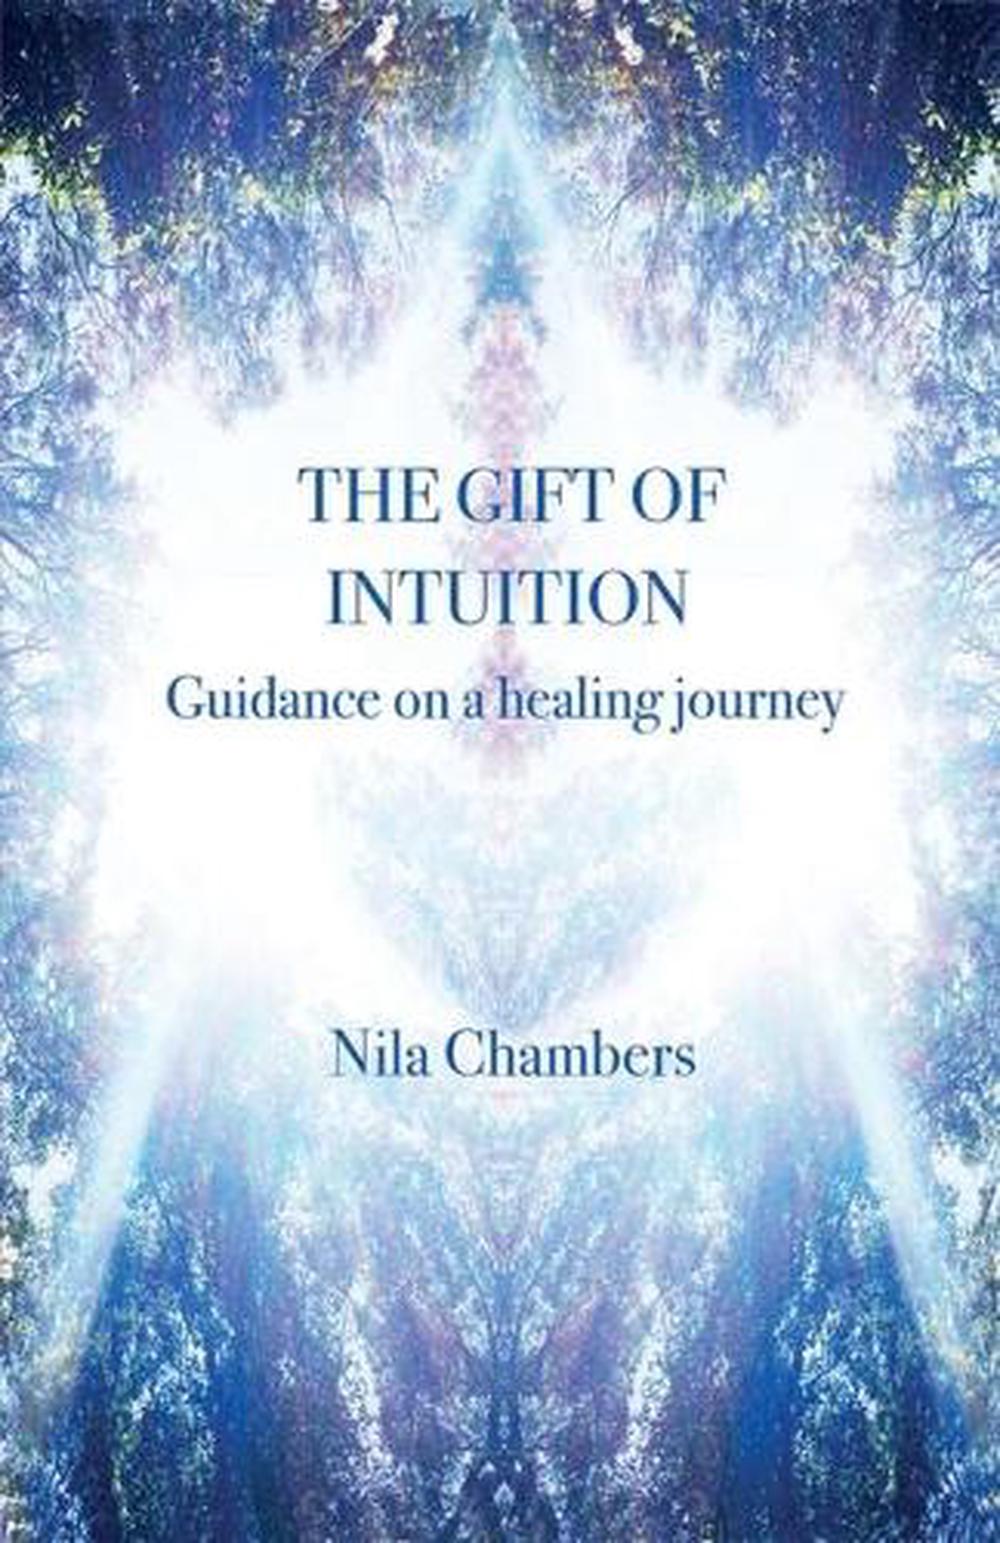 The Gift of Intuition guidance on a healing journey by Nila Chambers